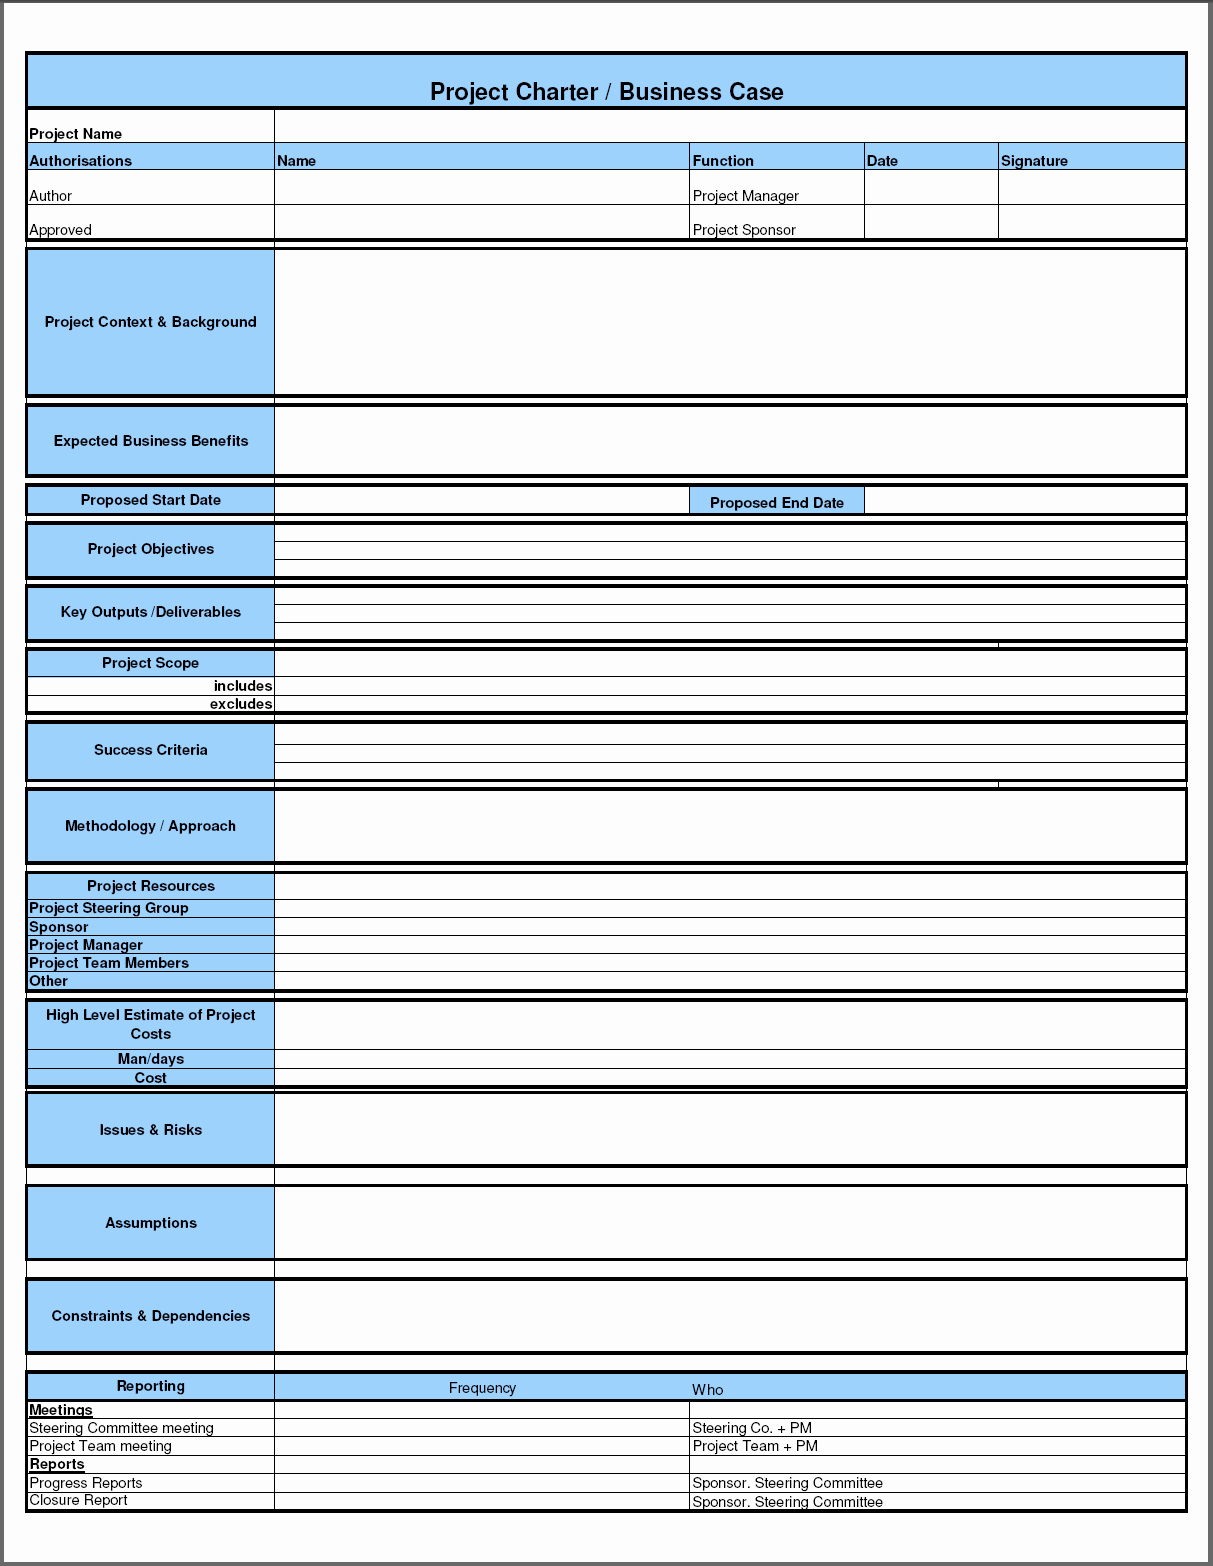 Project Charter Template Word Fresh Chart Project Charter Template